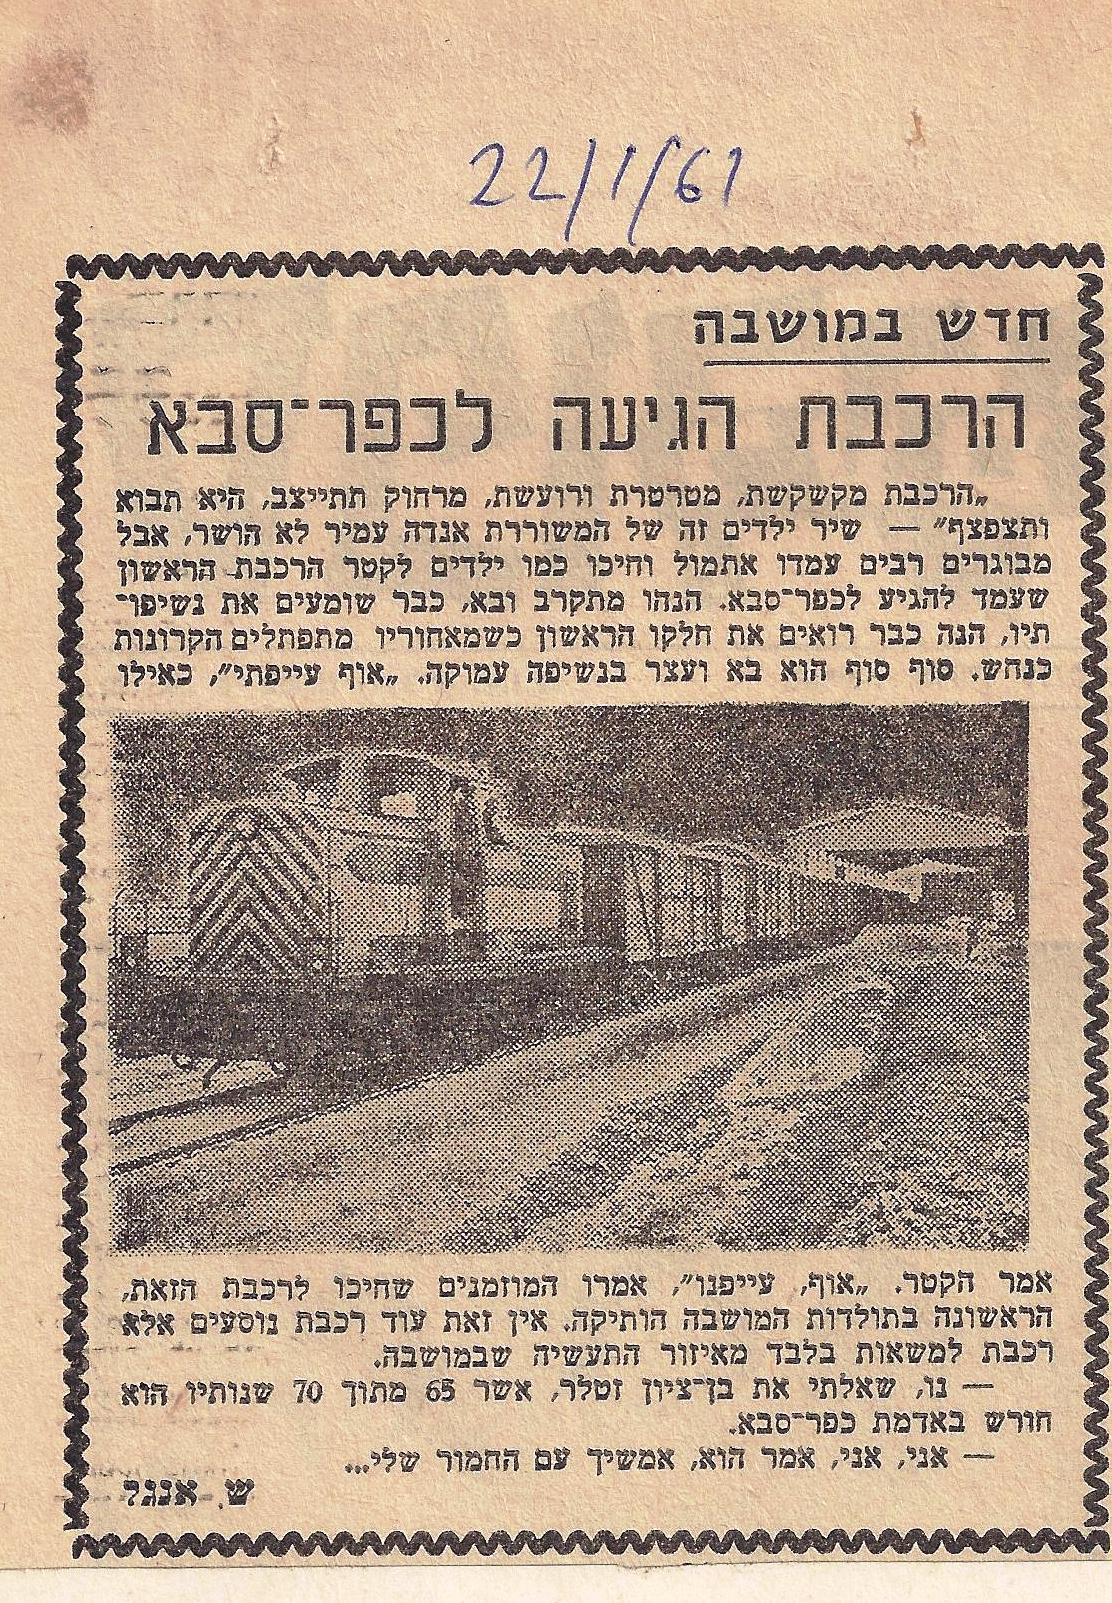 Photo of Davar newspaper article 22/01/1961